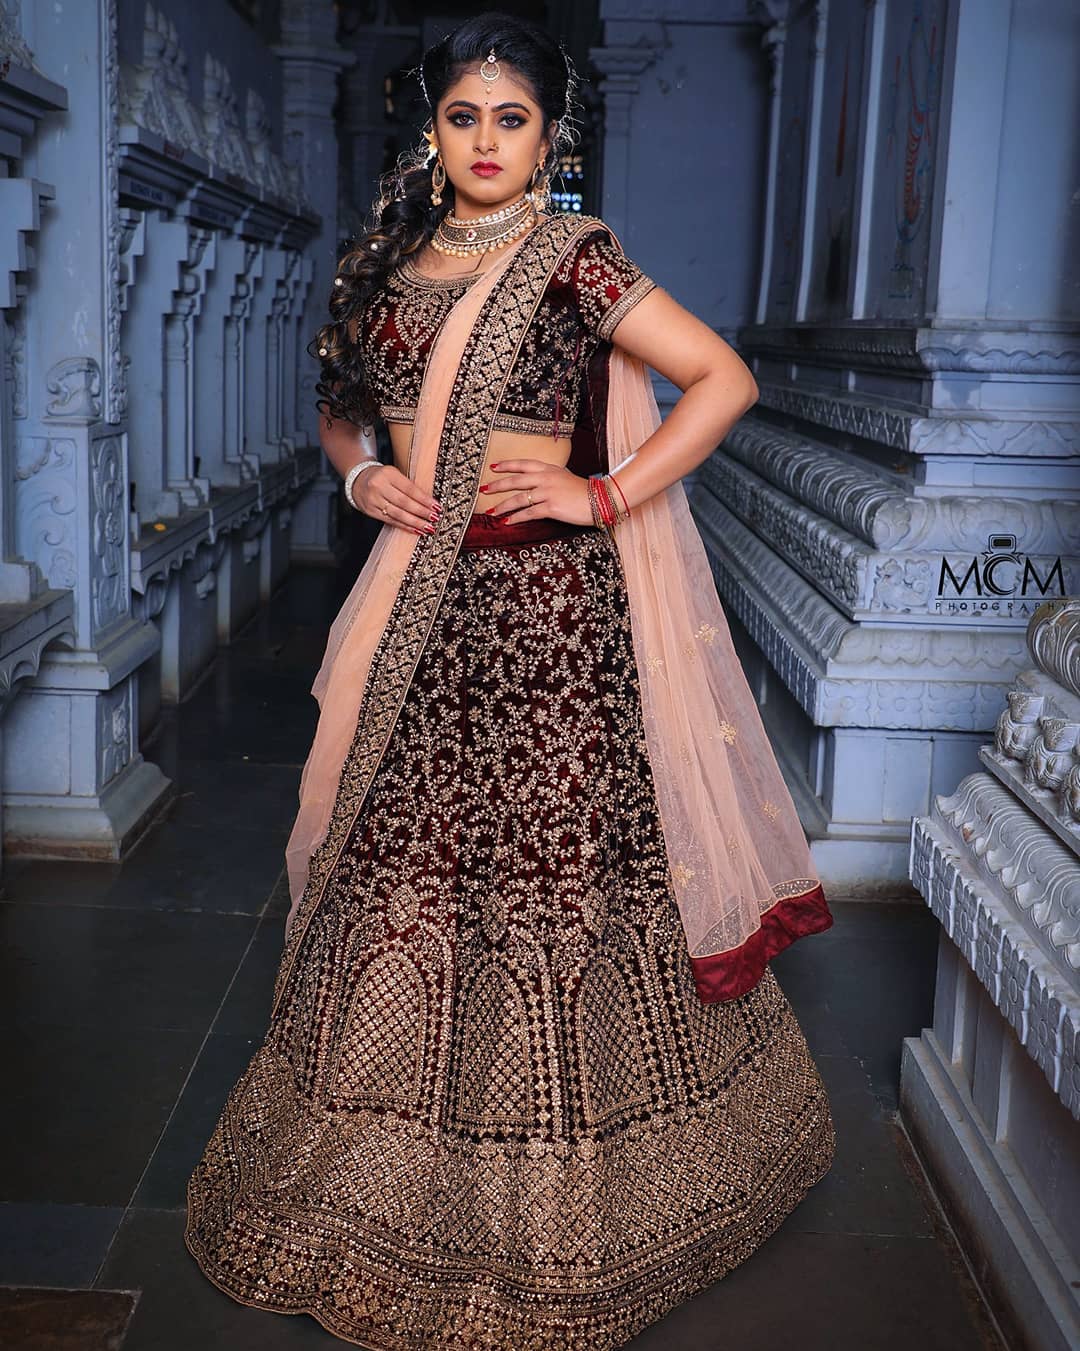 Nagakannike Fame Meghasri In Maroon Embroidered Bridal Lehenga Set Can Be Your Bridal Traditional & Western Outfit & Look